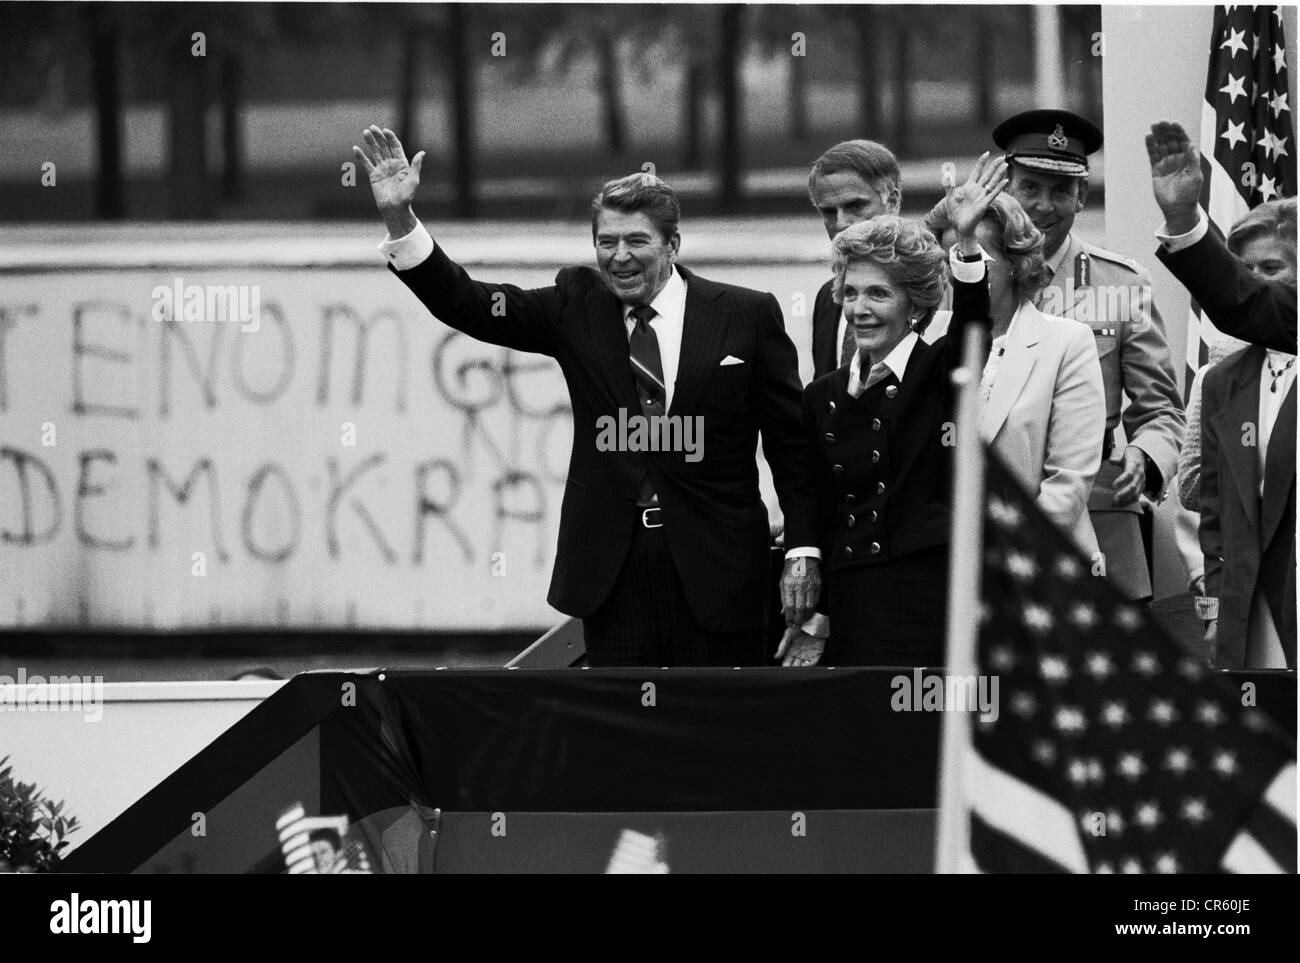 Reagan, Ronald, 6.2.1911 - 5.6.2004, American actor and politician (Republican), President of the United States, half length, with his wife Nancy, standing at Brandenburg Gate, Berlin, Germany, 12.6.1987, Stock Photo